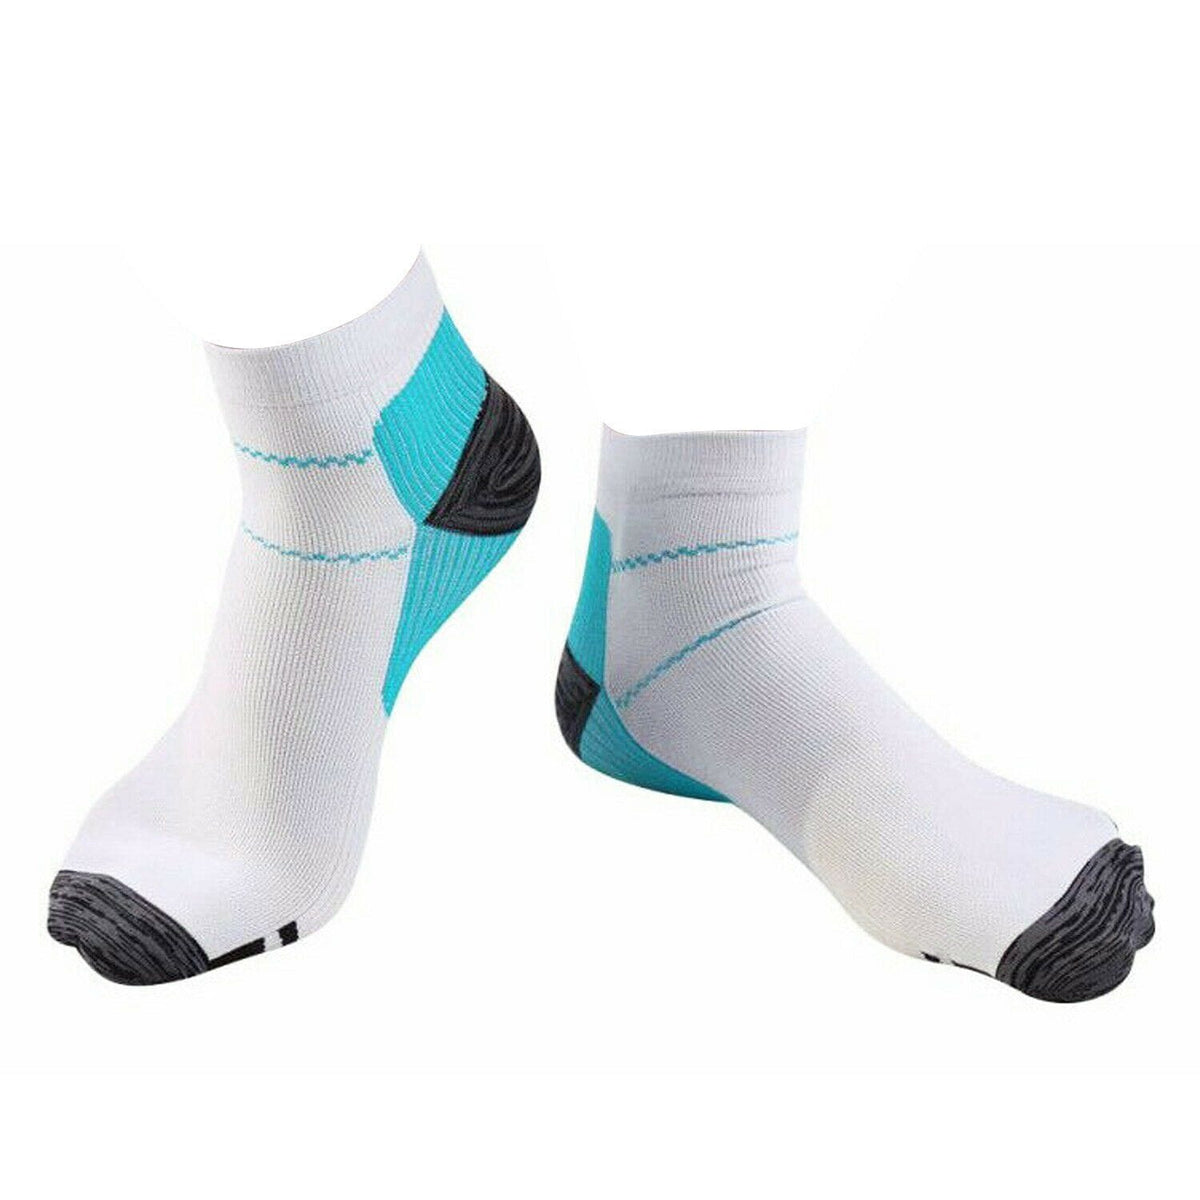 Copper Compression Socks Made For Foot & Leg Support | Energy Fit Wear